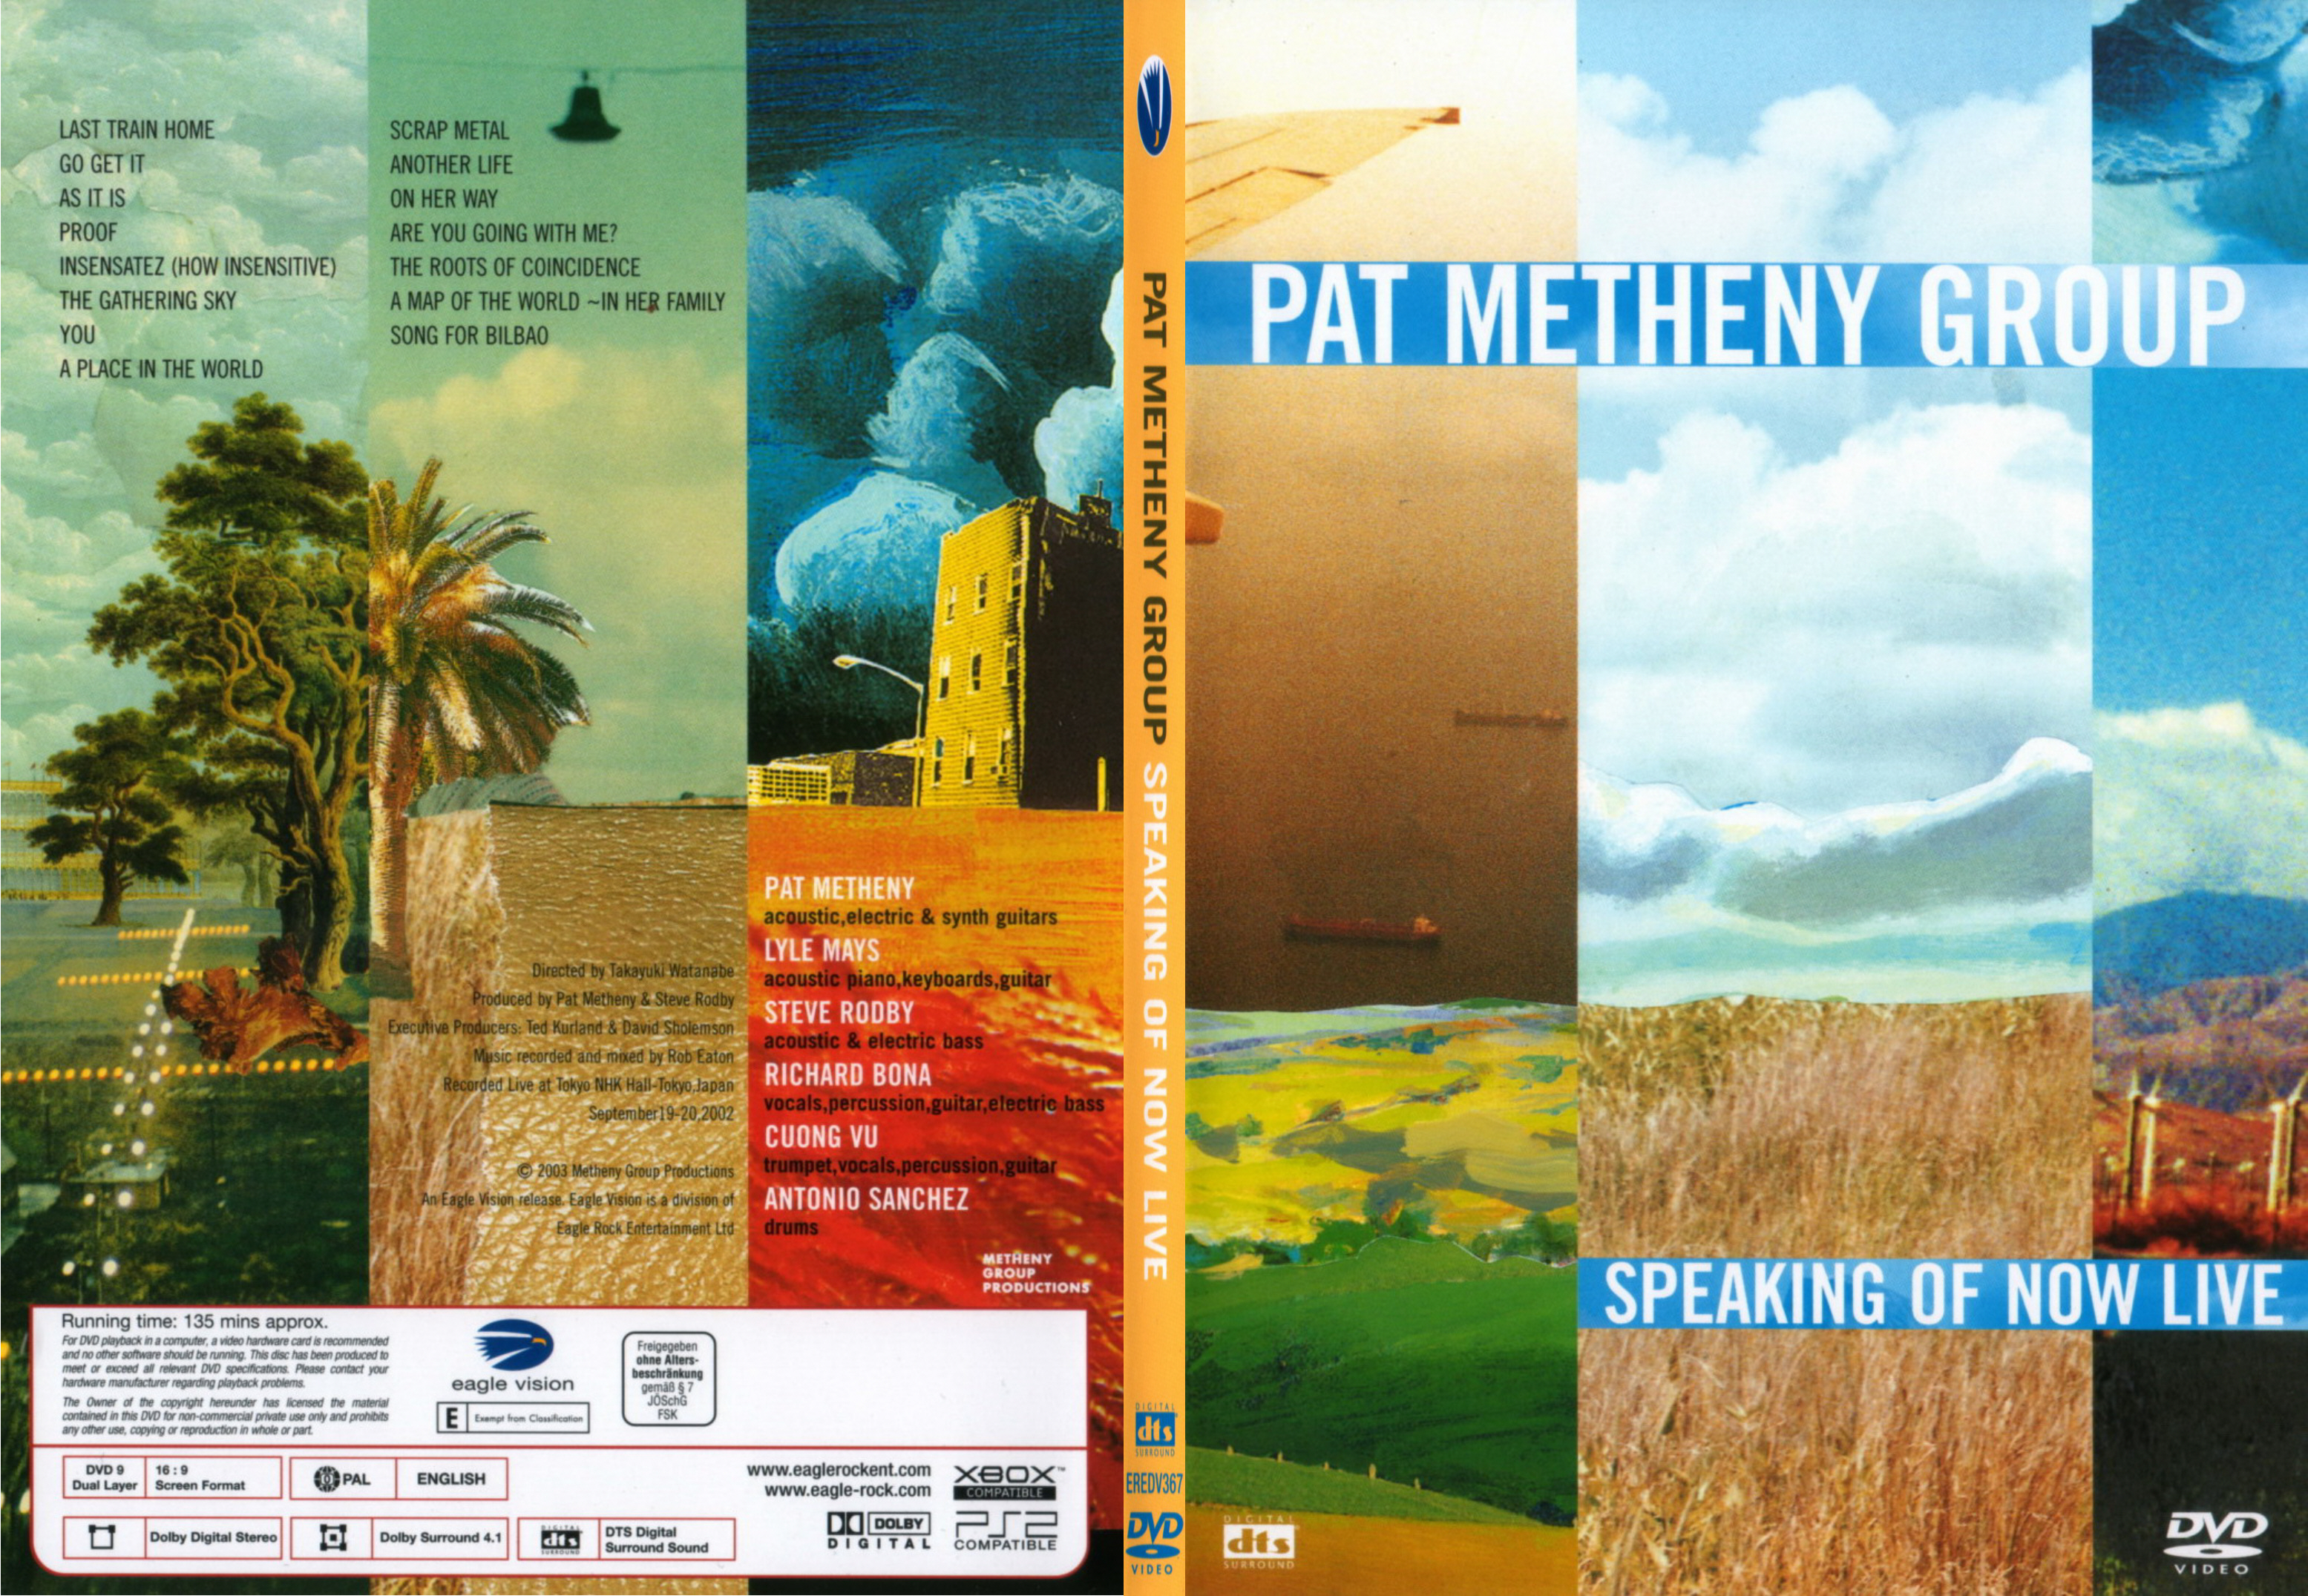 Jaquette DVD Pat Metheny Group - Speaking of now live - SLIM